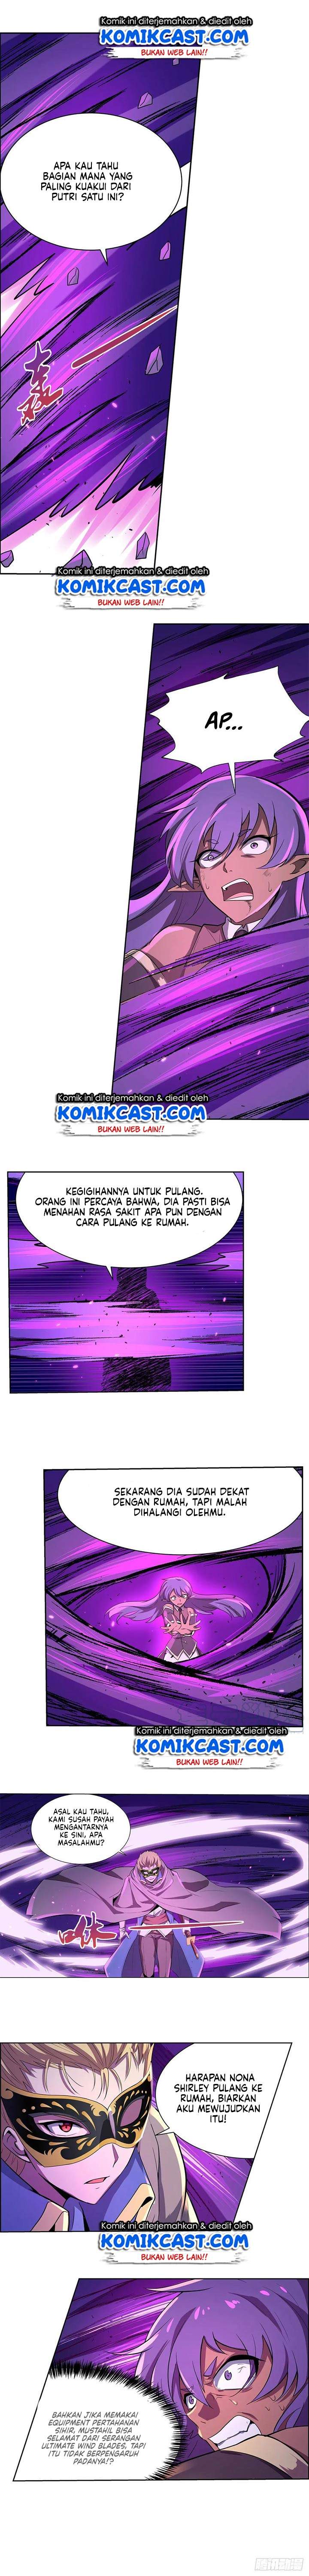 The Demon King Who Lost His Job Chapter 102 Bahasa Indonesia